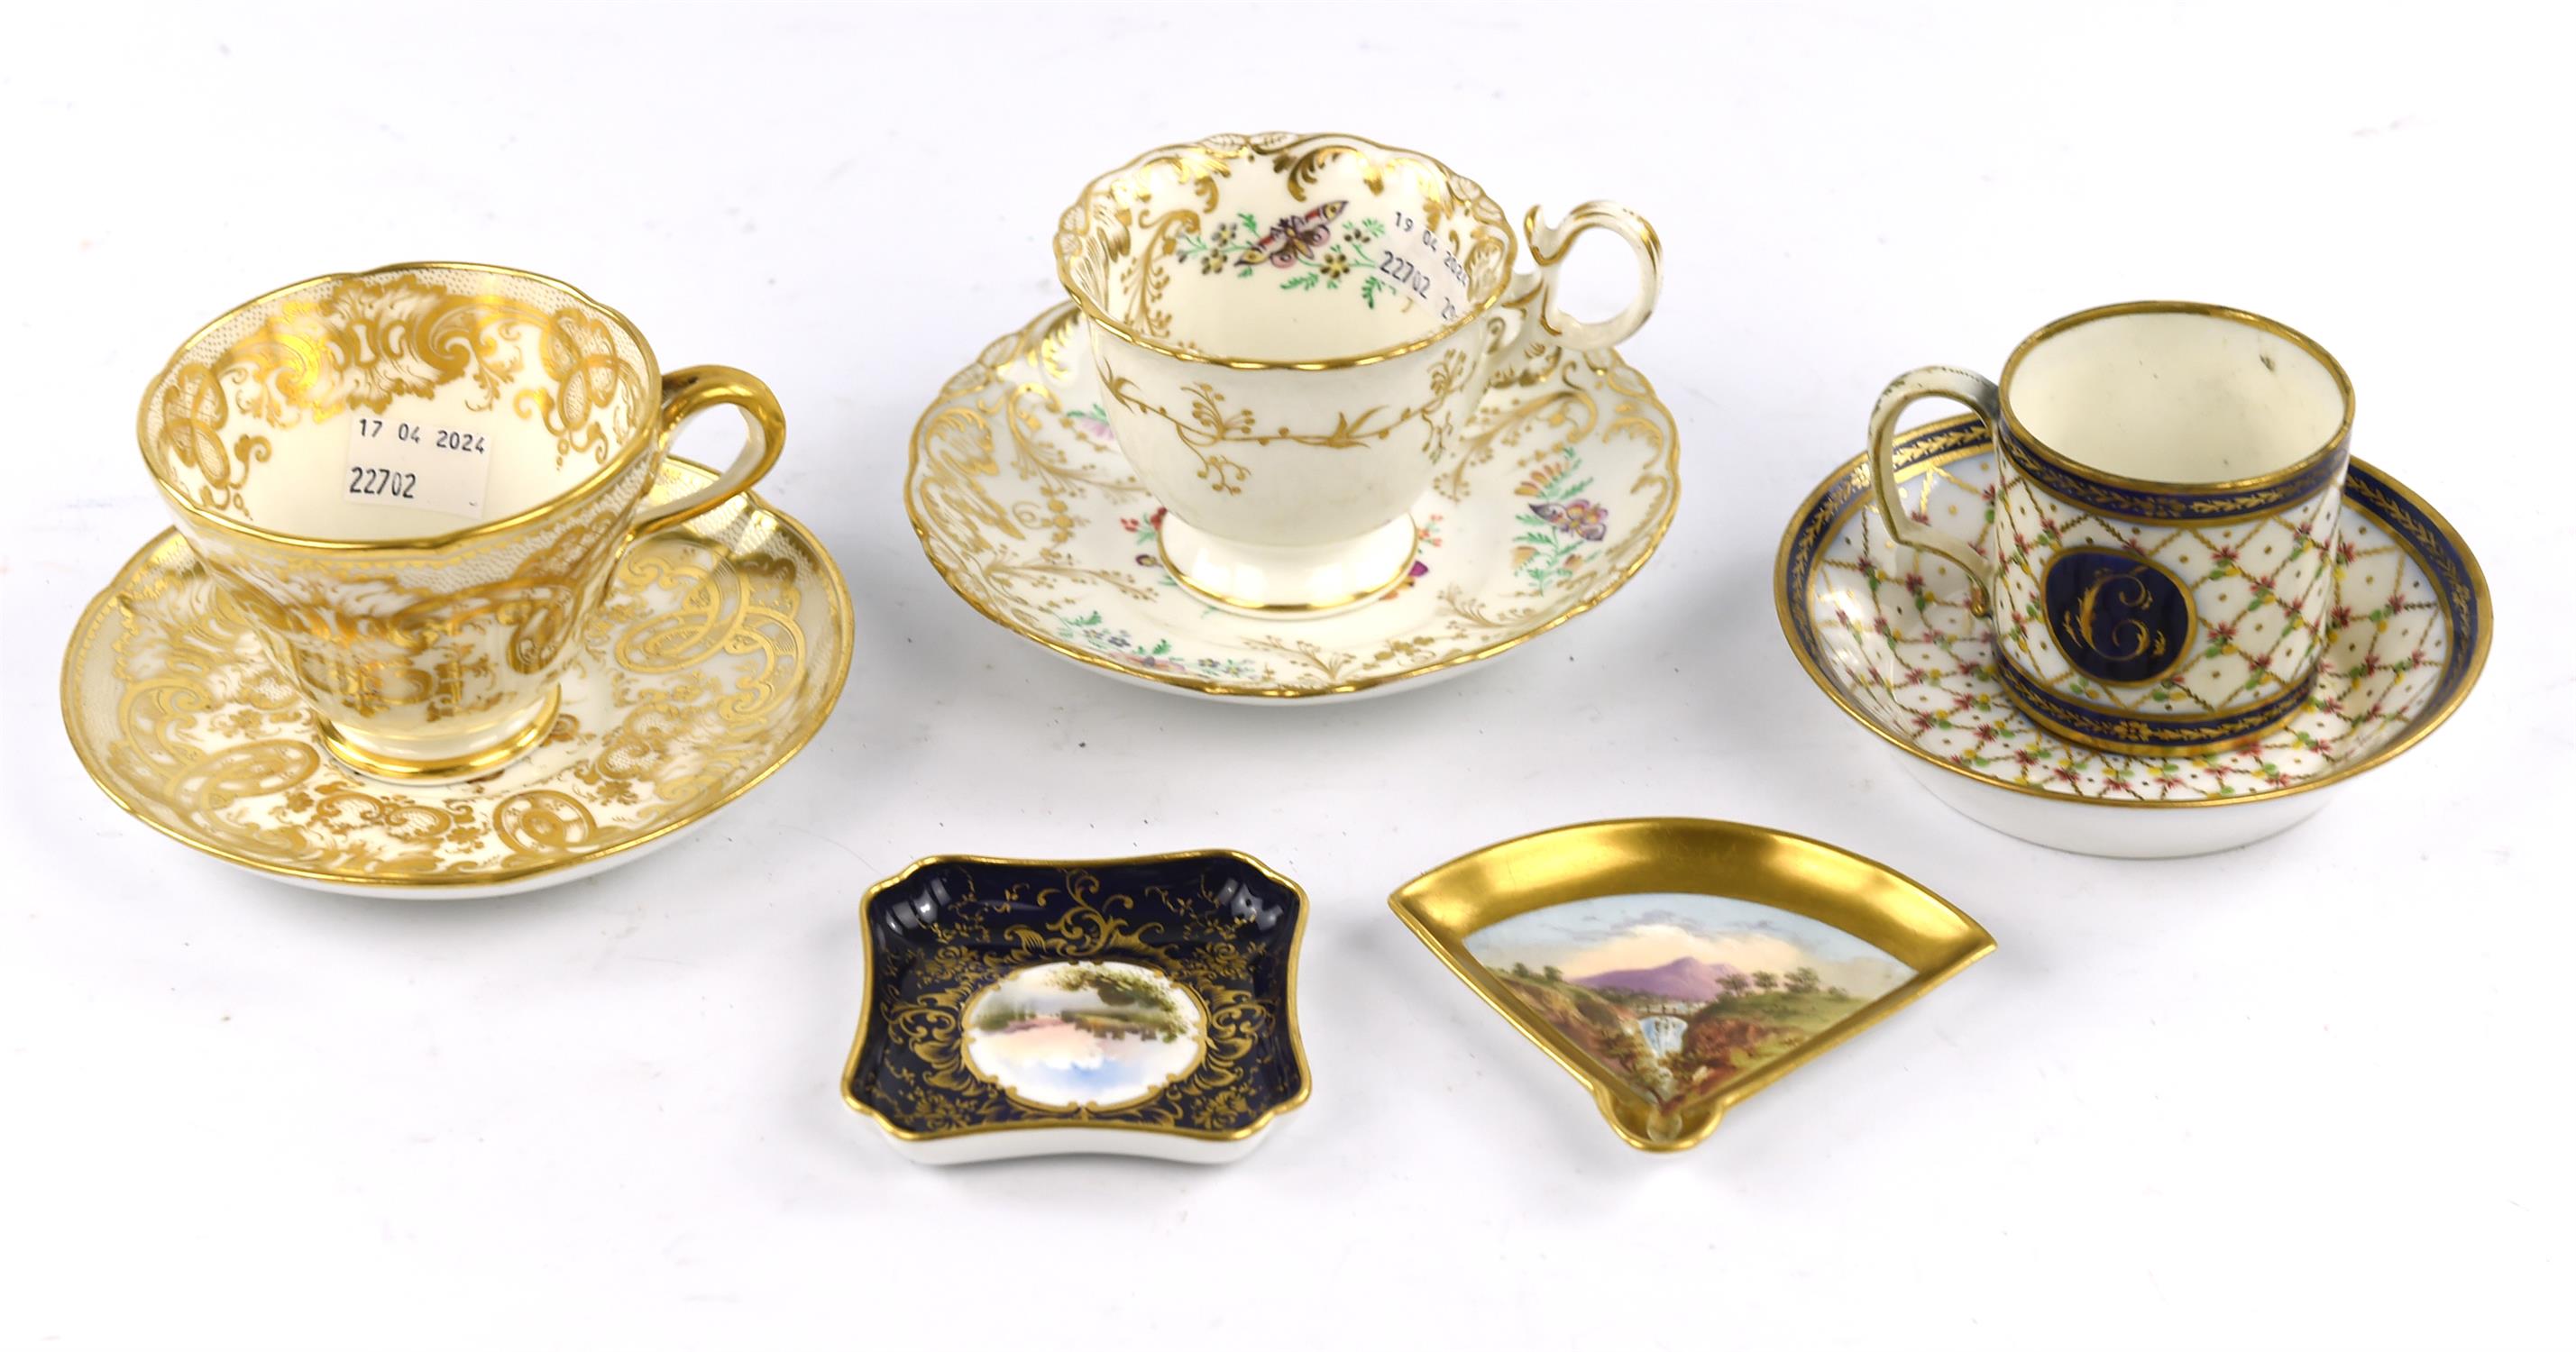 A late 18th/early 19th century Paris porcelain cabinet cup and saucer, gilt and foliate decorated